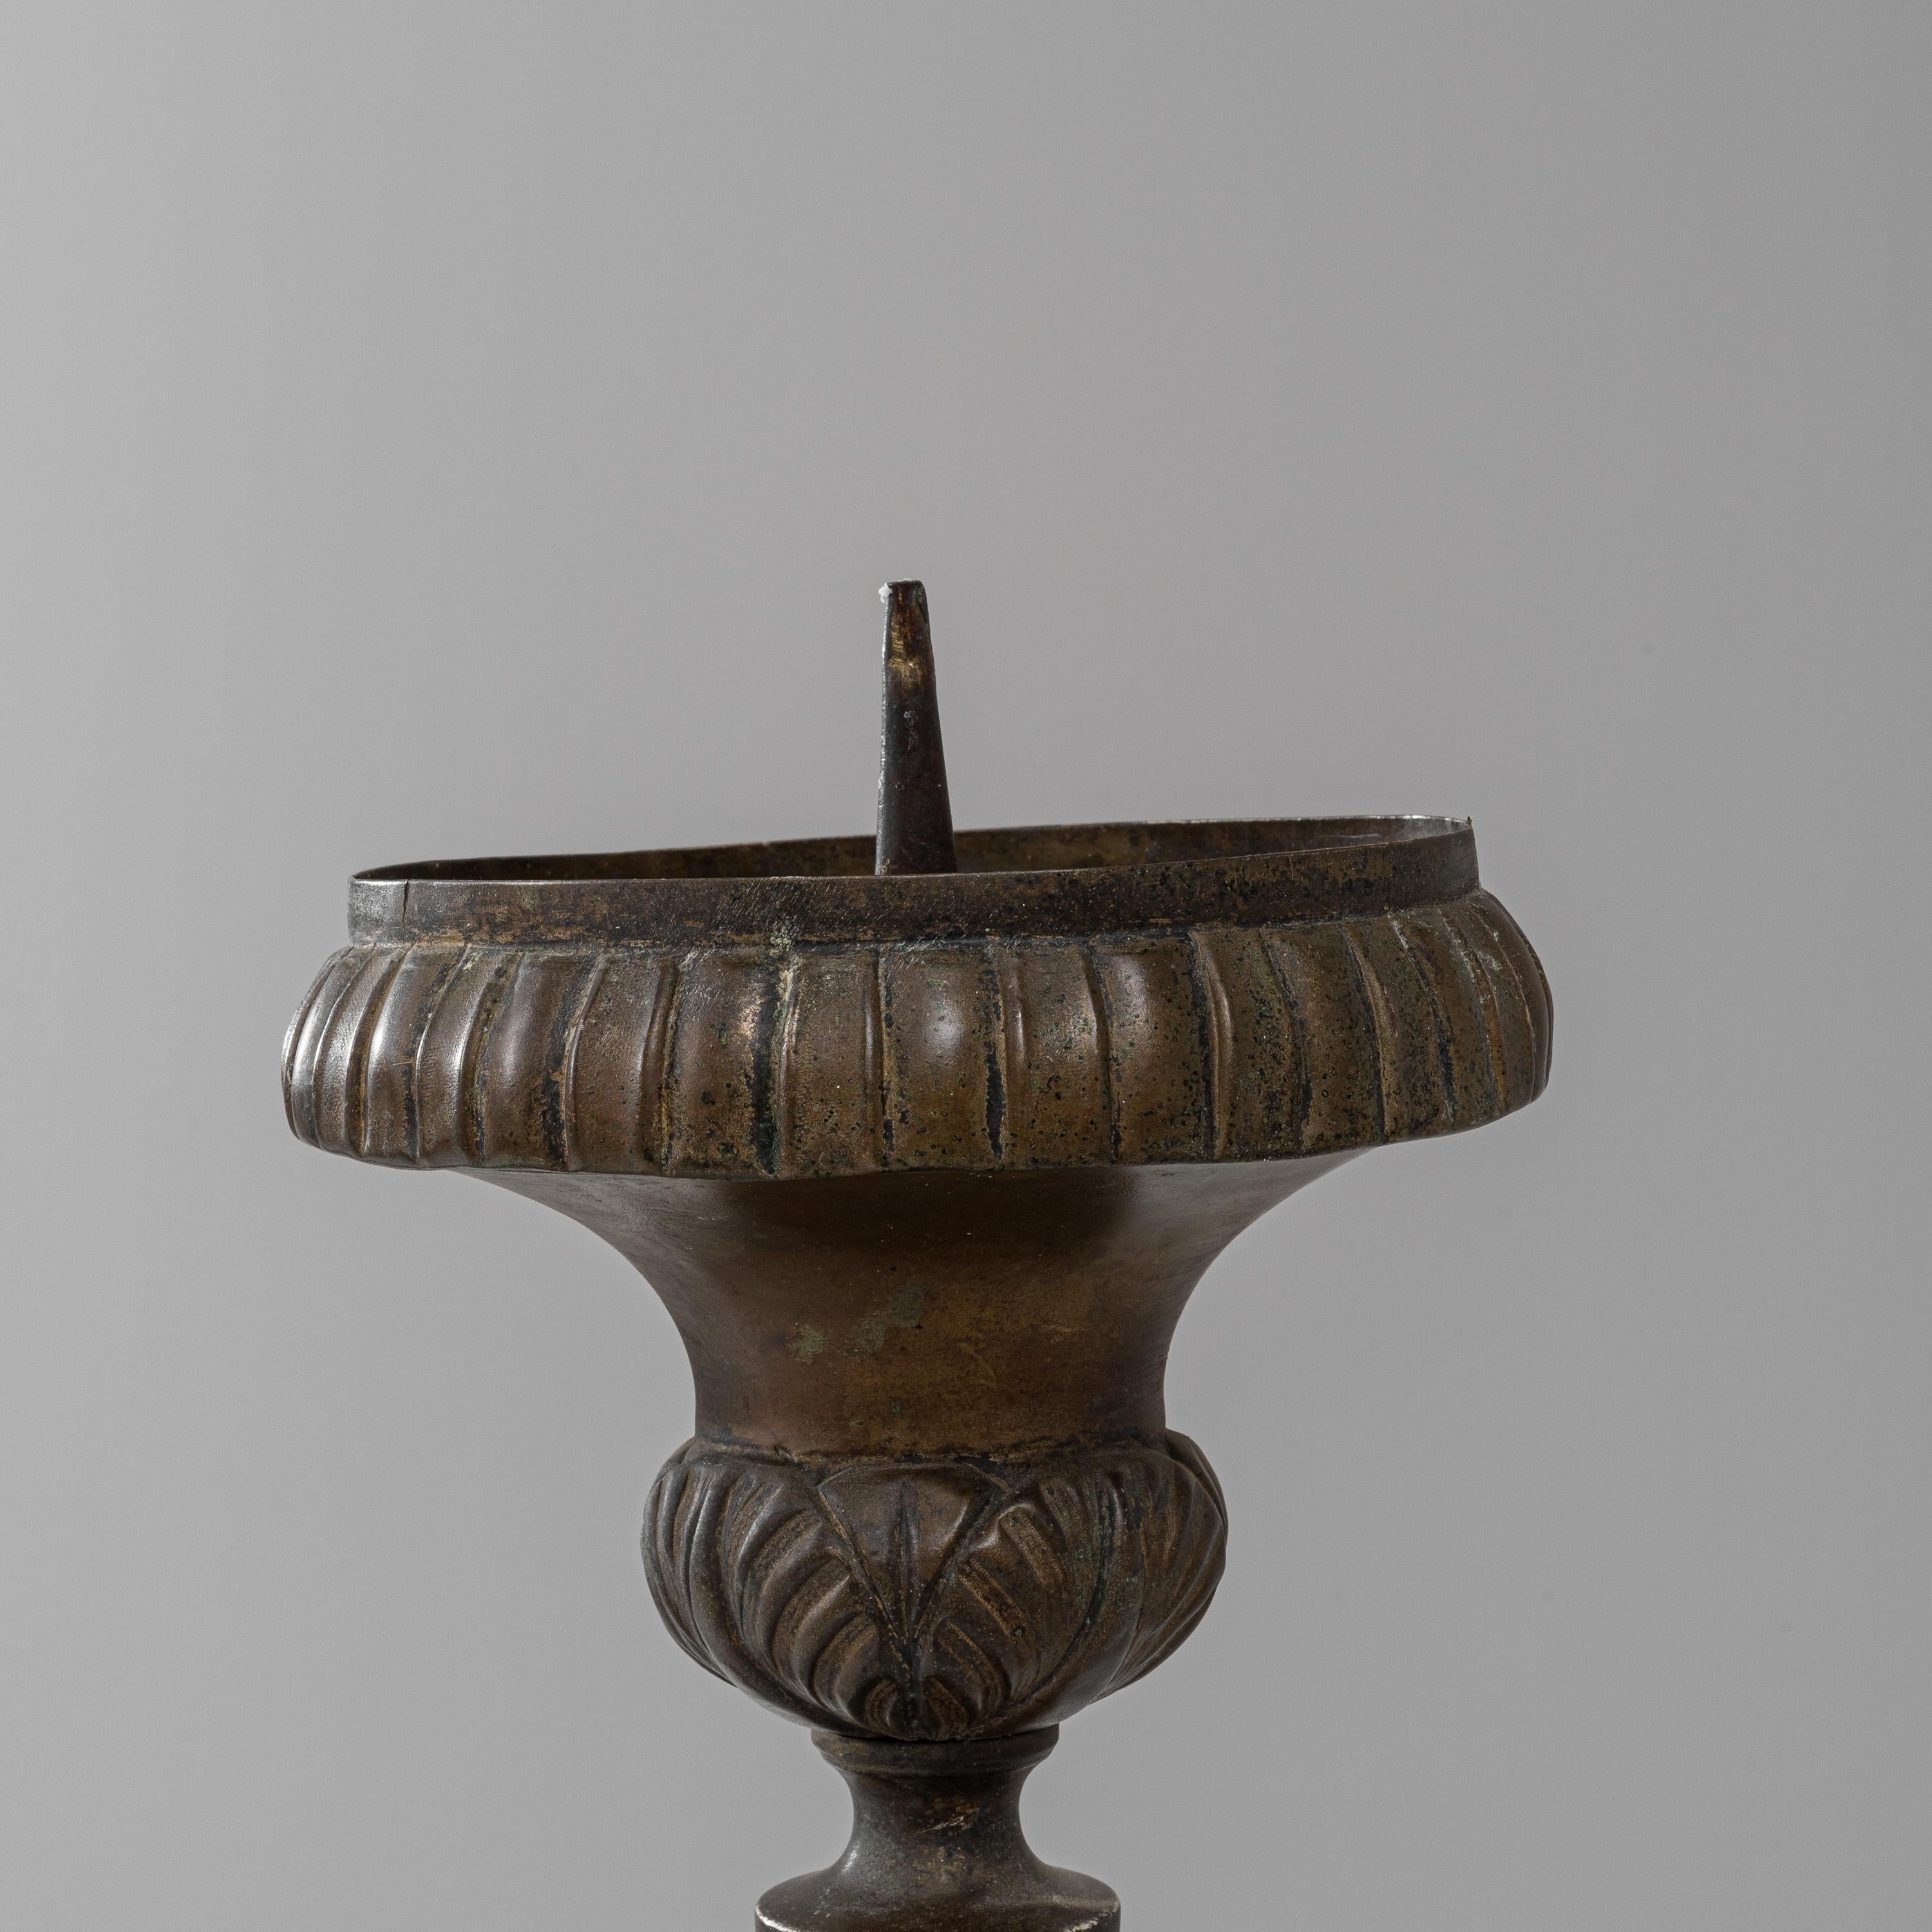 19th Century French Brass Candle Holders, a Pair 5